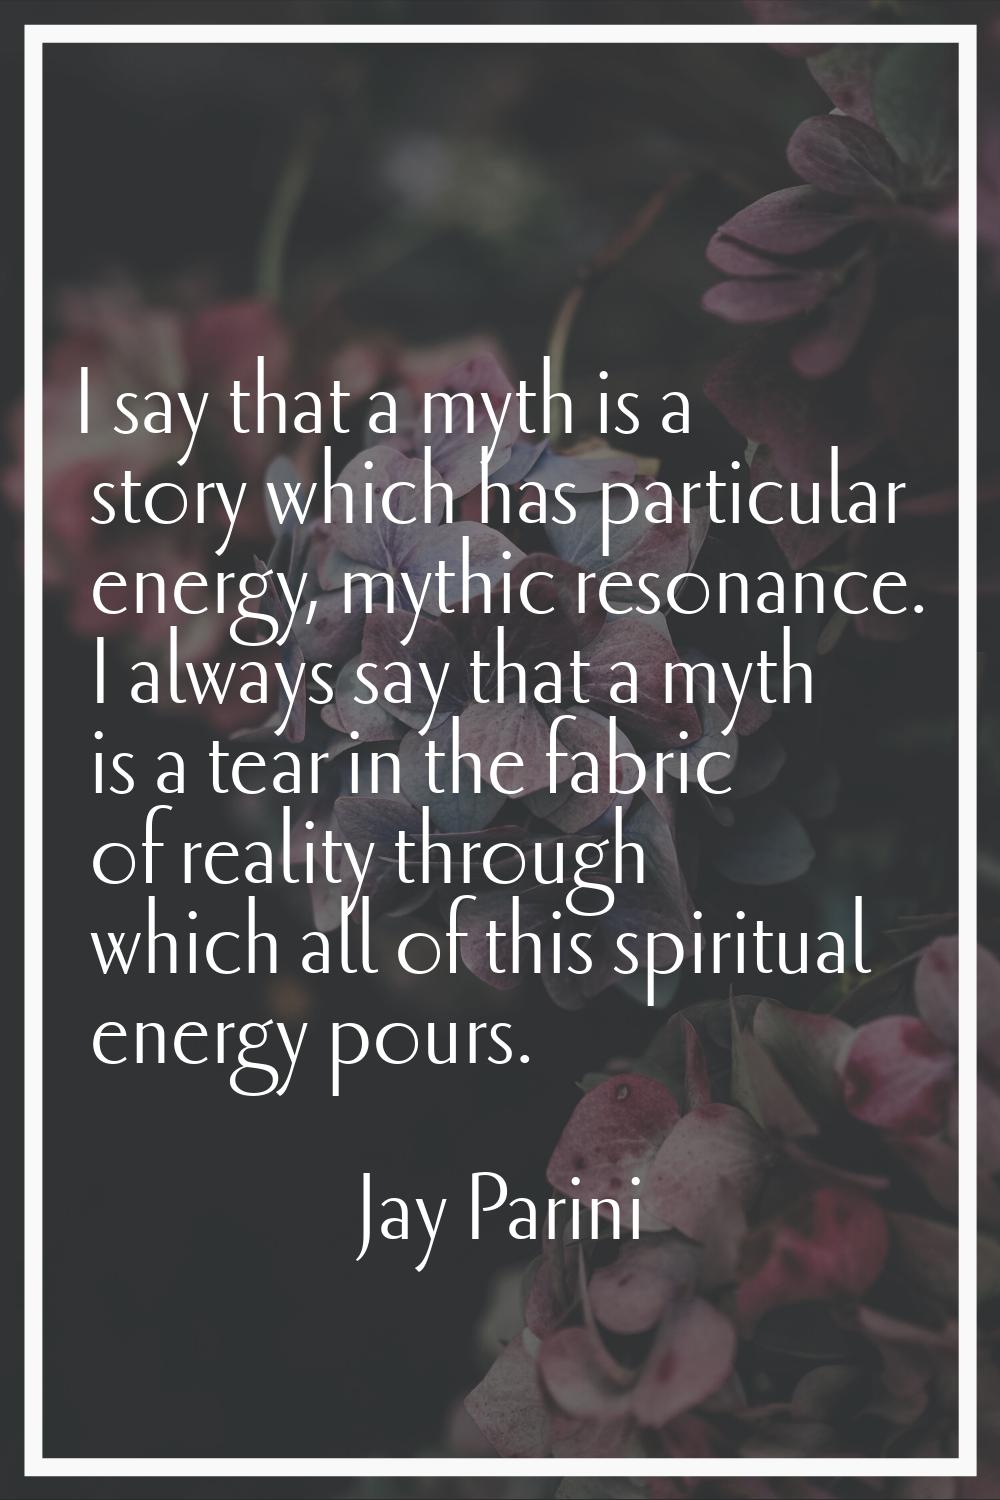 I say that a myth is a story which has particular energy, mythic resonance. I always say that a myt